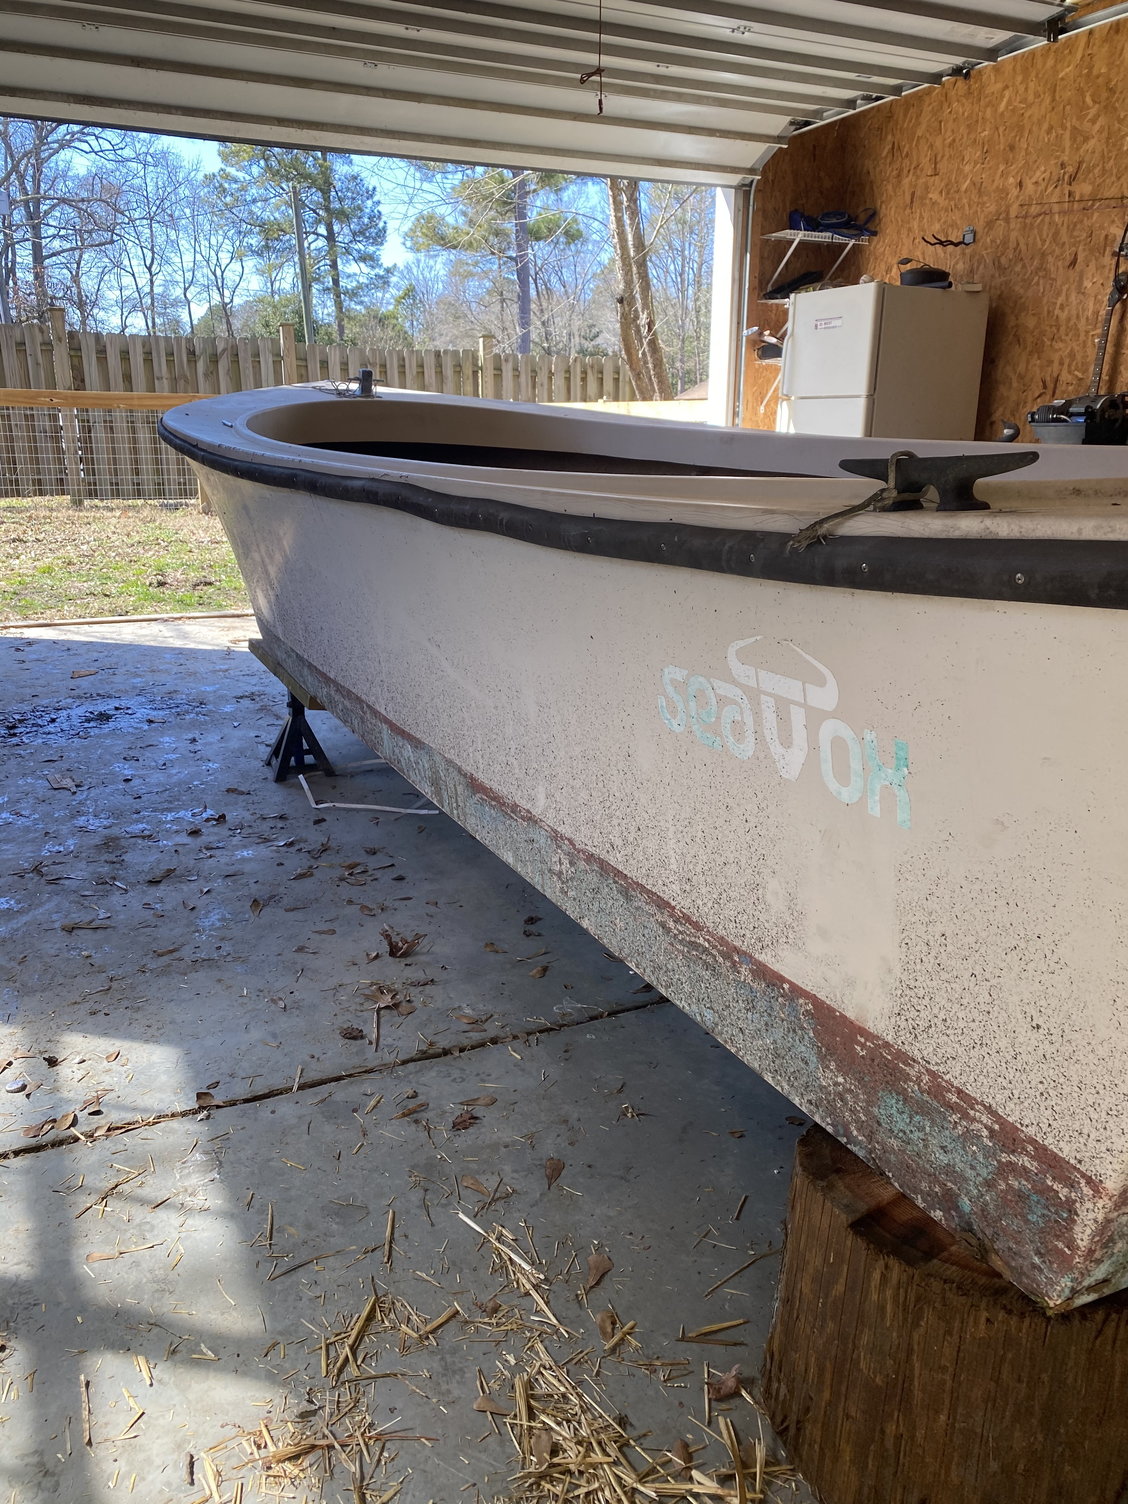 1977 Sea Ox Rebuild - The Hull Truth - Boating and Fishing Forum